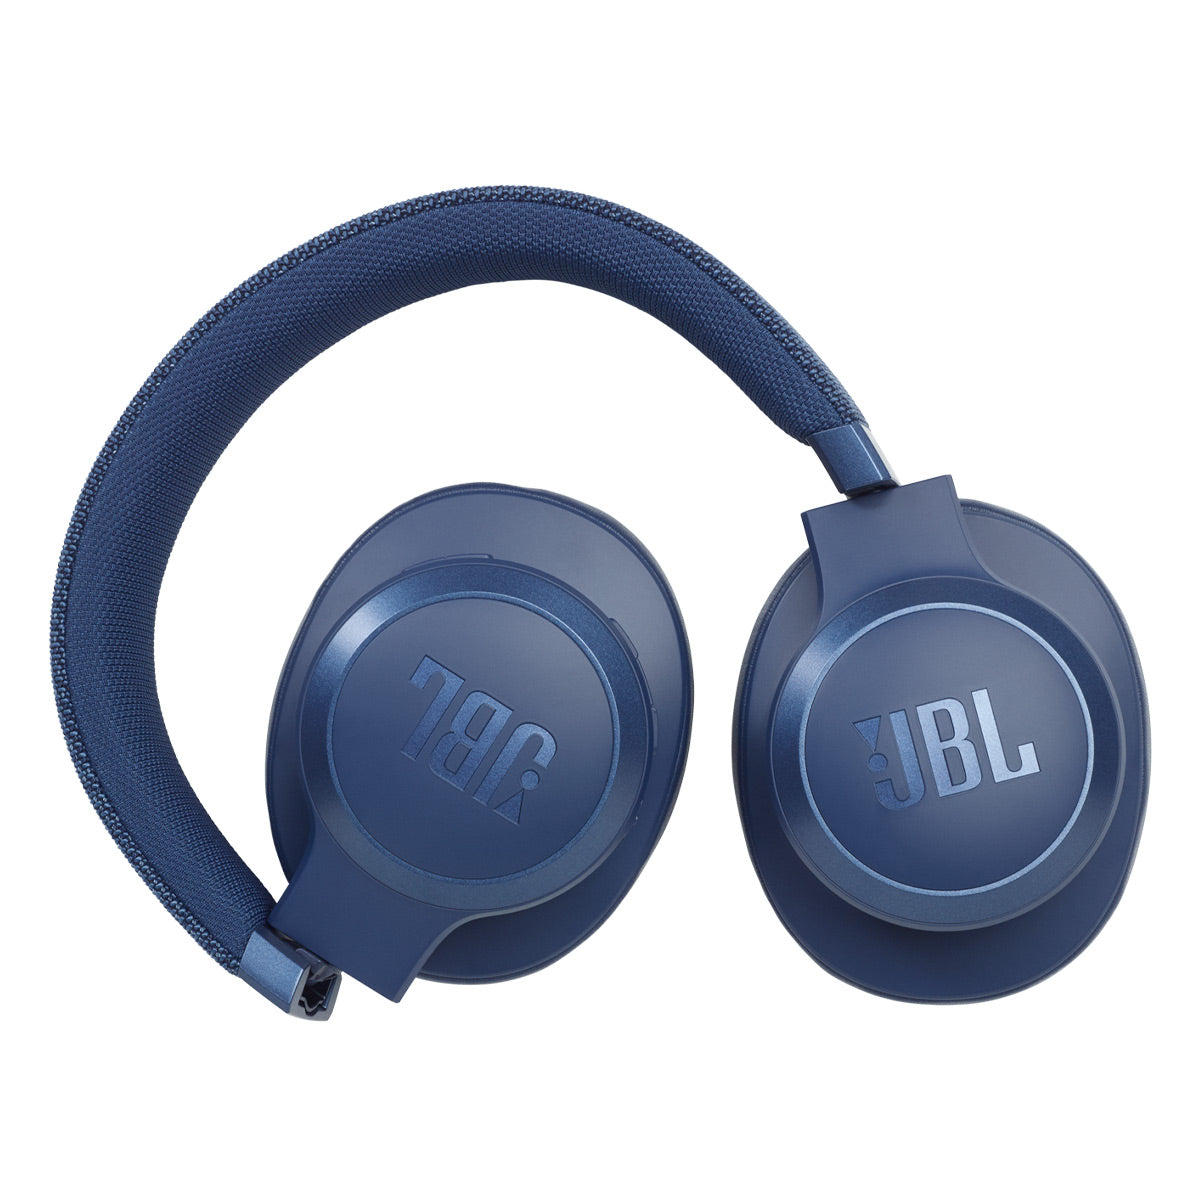 JBL Live 660NC Wireless Over-Ear Noise Cancelling Headphones (Blue)